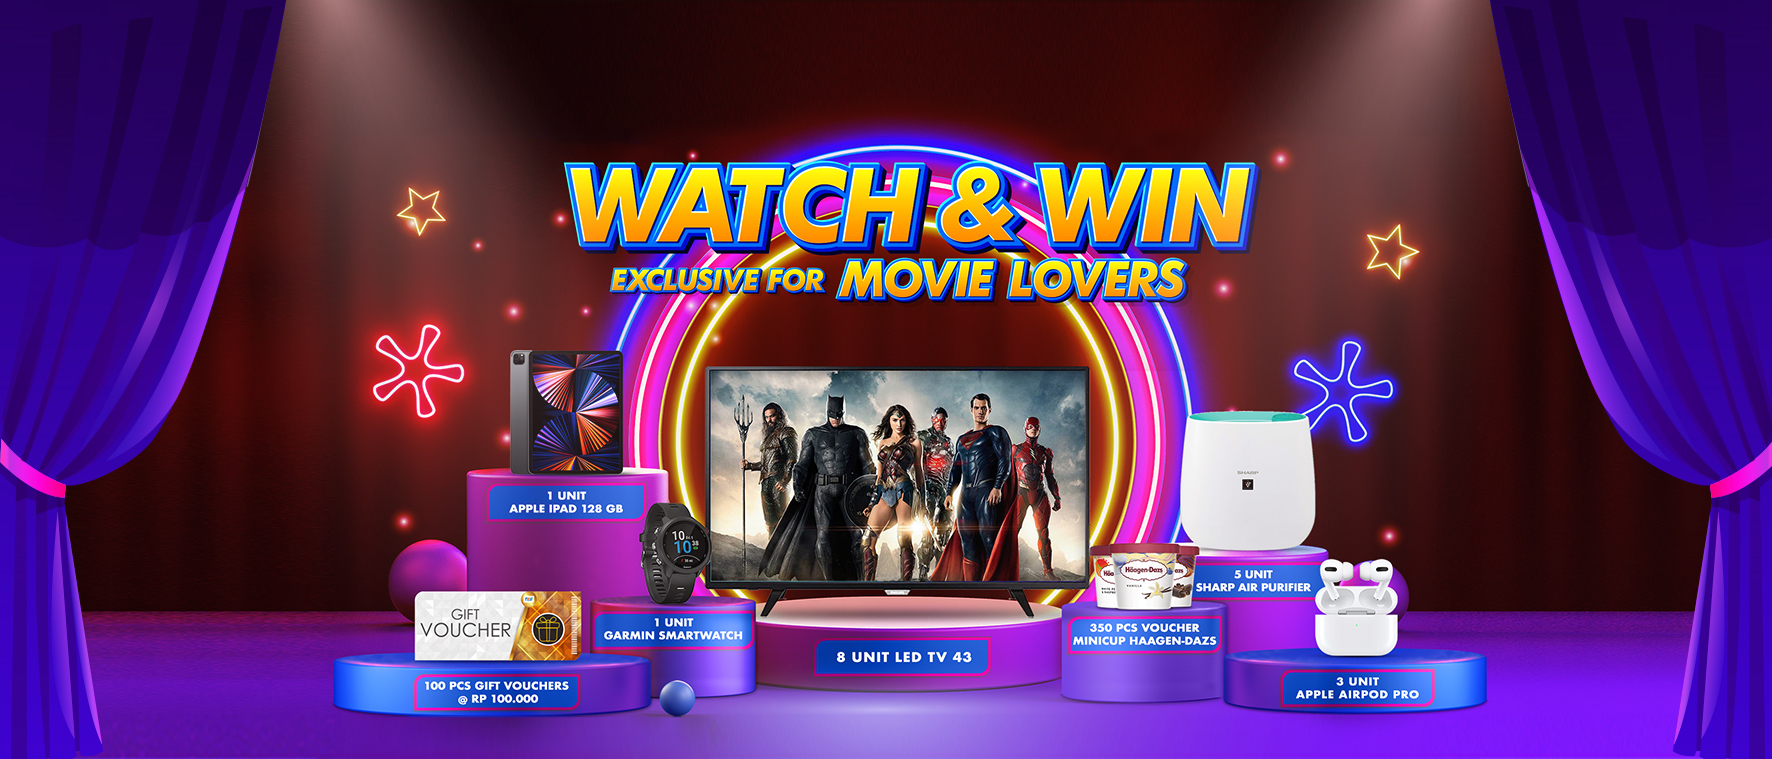 Watch & Win Exclusive for MOVIE LOVERS